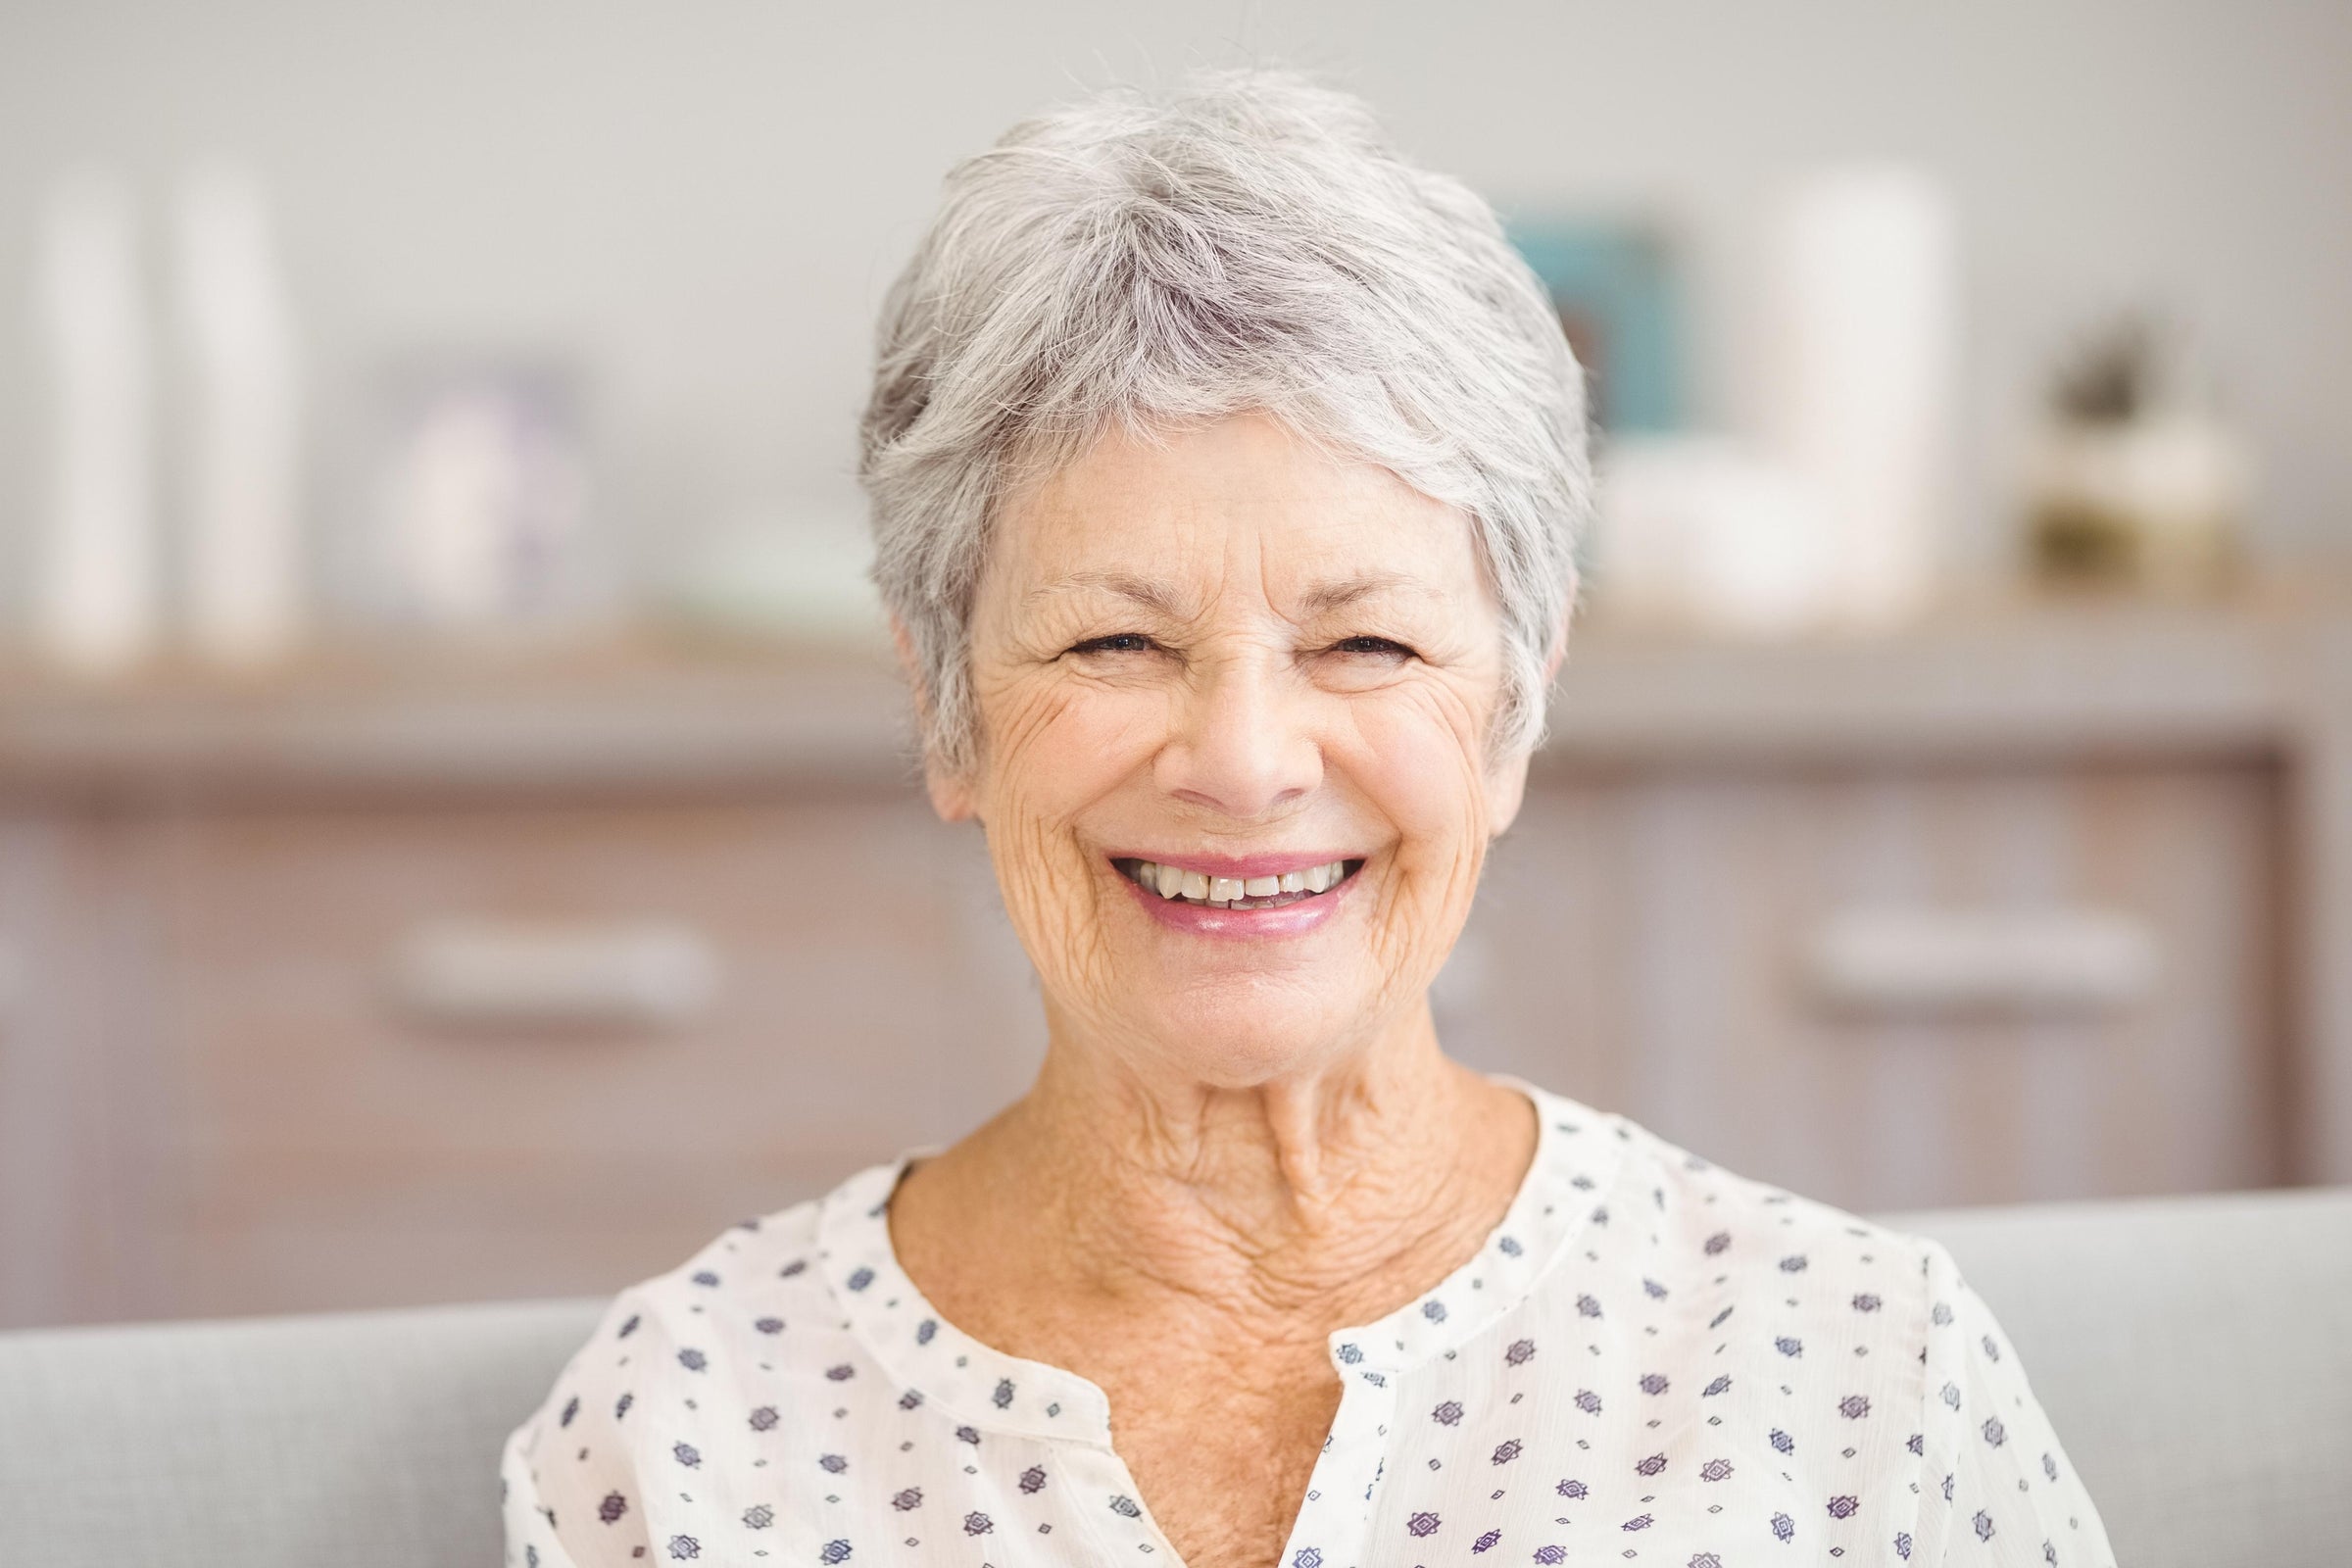 Elderly woman smiling brightly as a result of taking mood boosting supplements